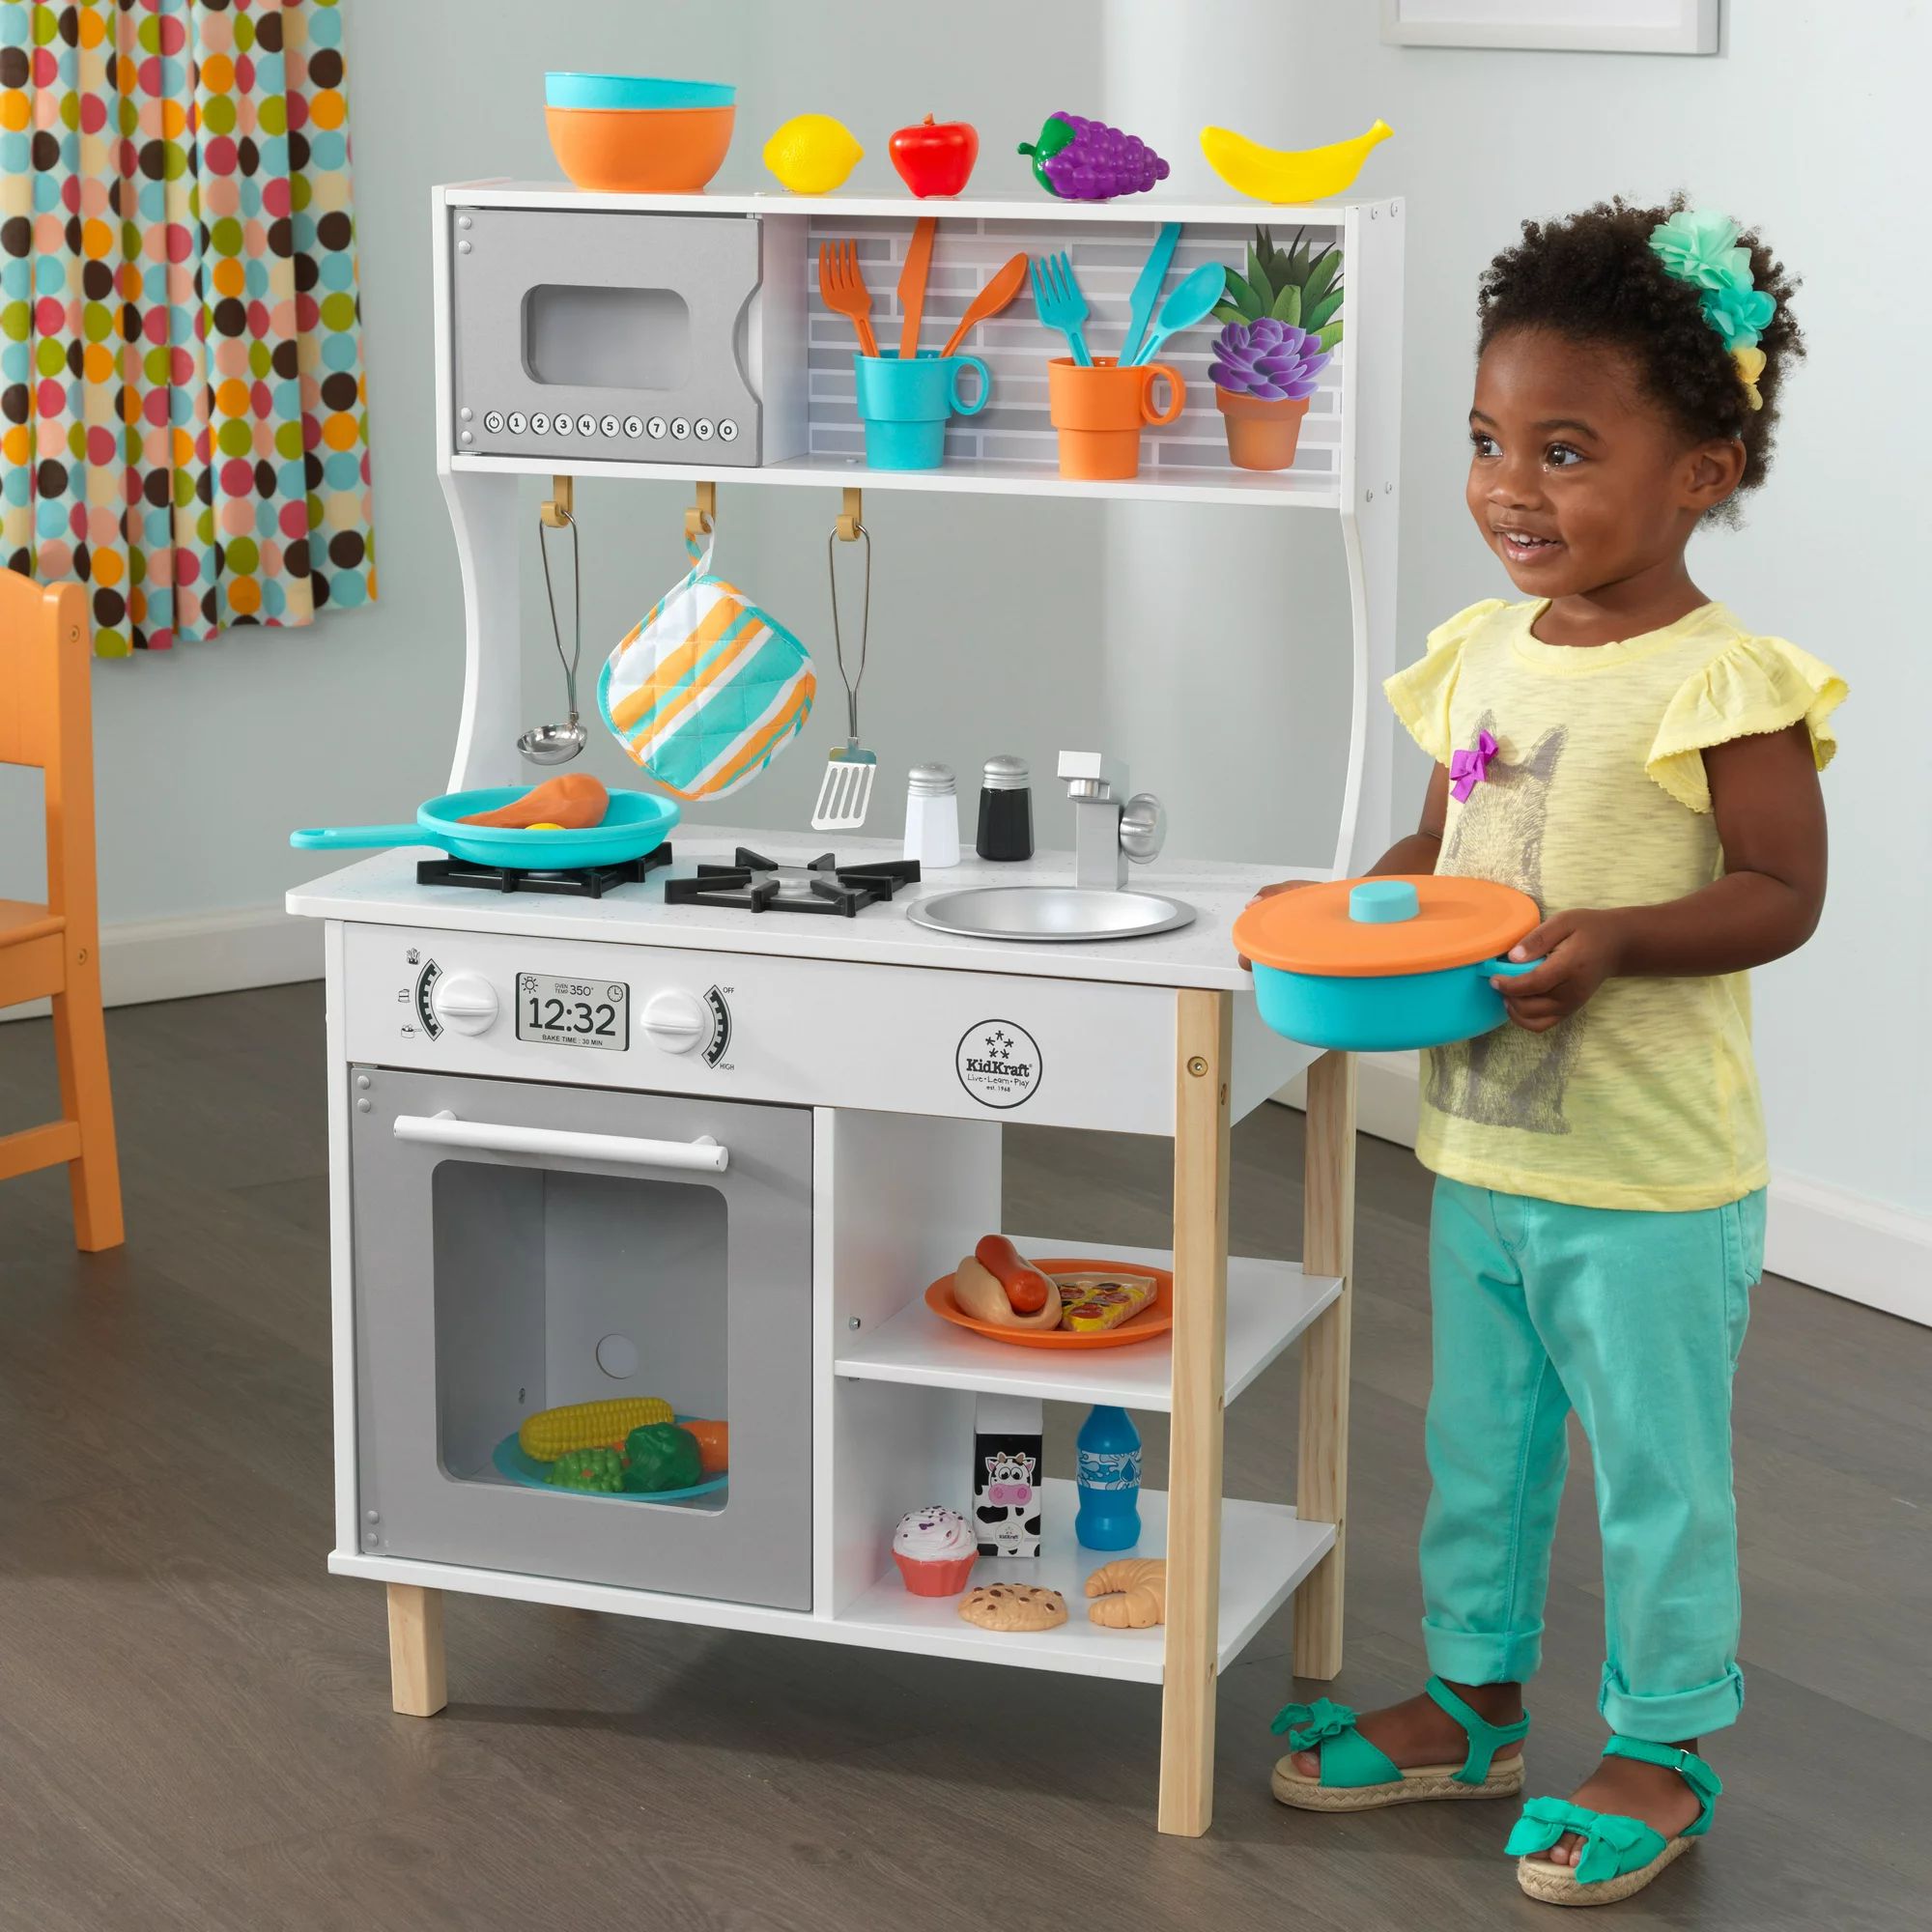 KidKraft All Time Play Kitchen with 38 Piece Accessory Play Set | Walmart (US)